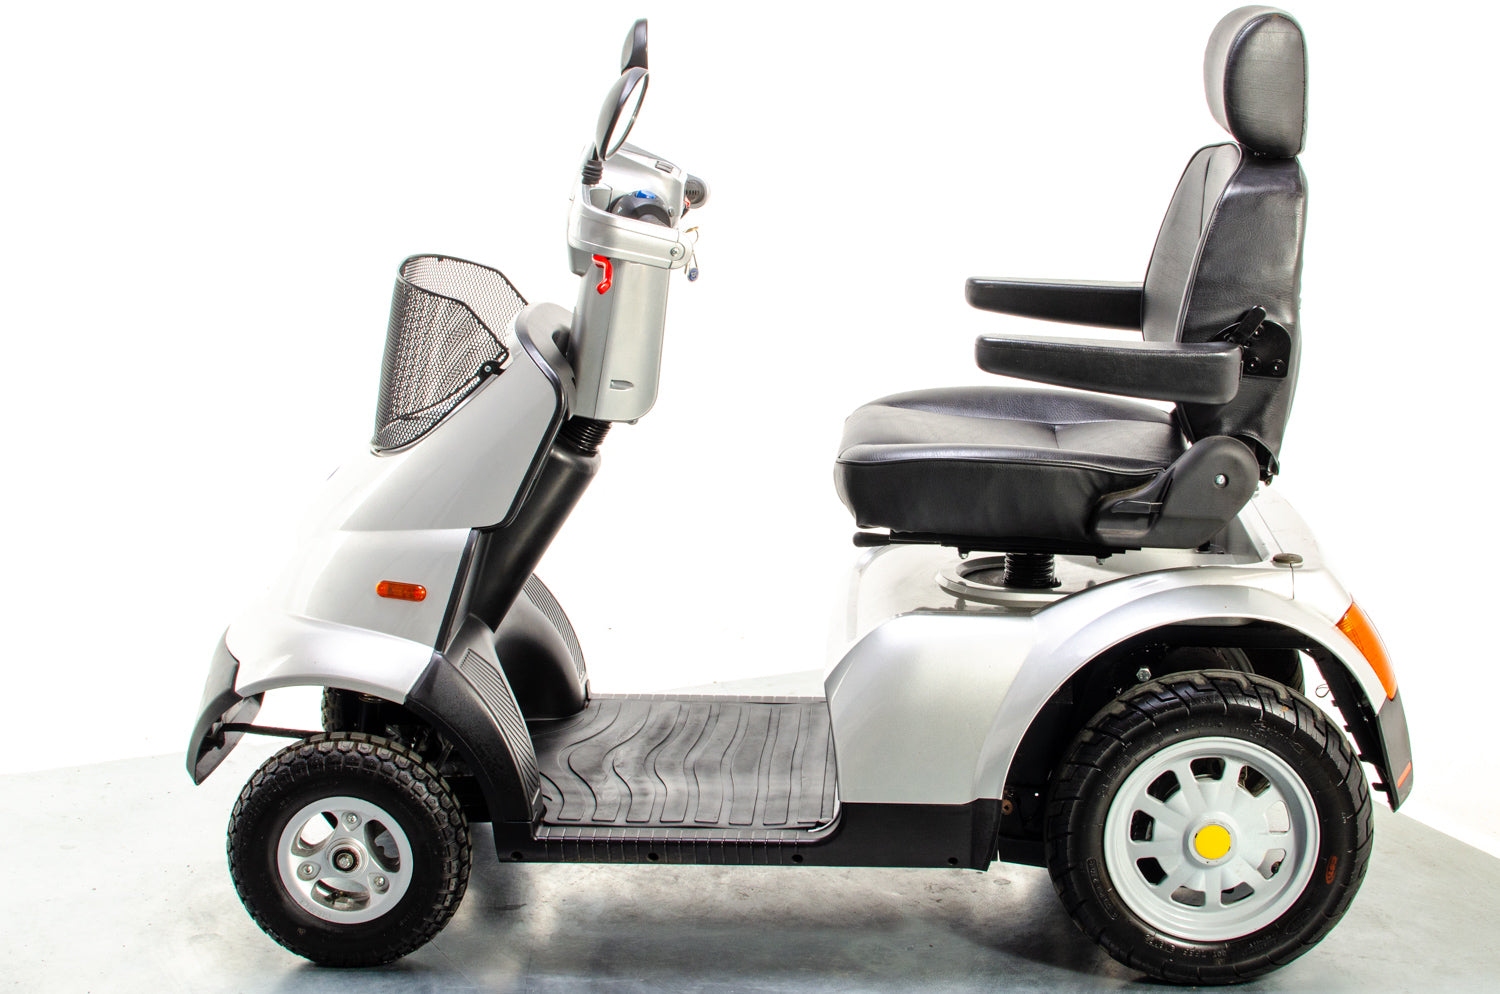 TGA Breeze S4 Used Mobility Scooter 8mph Large All-Terrain Road Legal Off-Road Silver